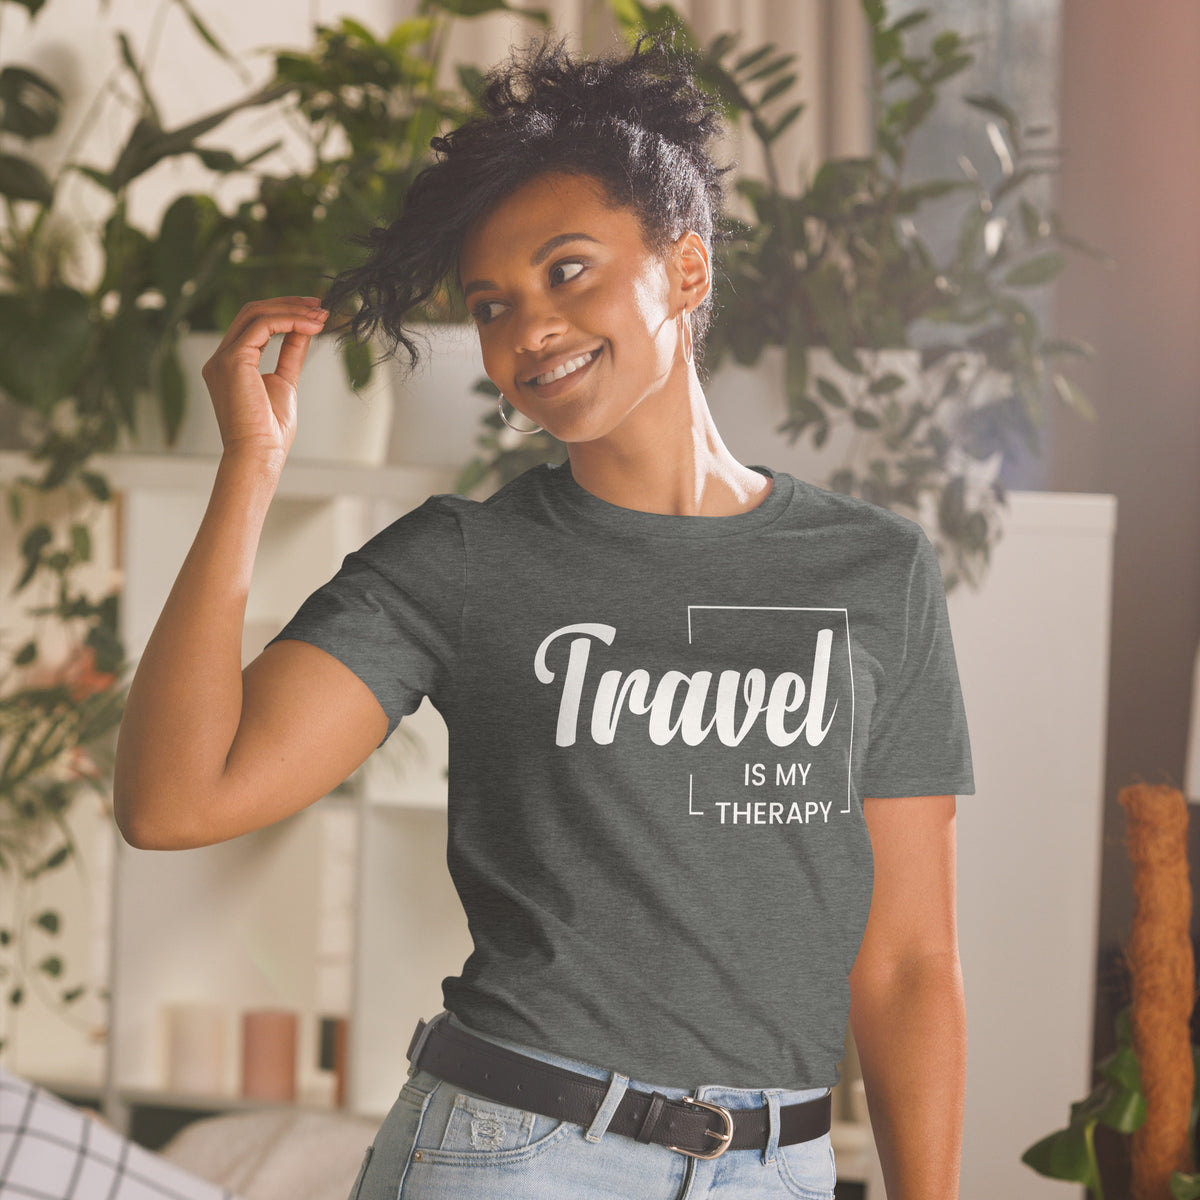 T-Shirt Van-Life Motiv " Travel is my Therapy "